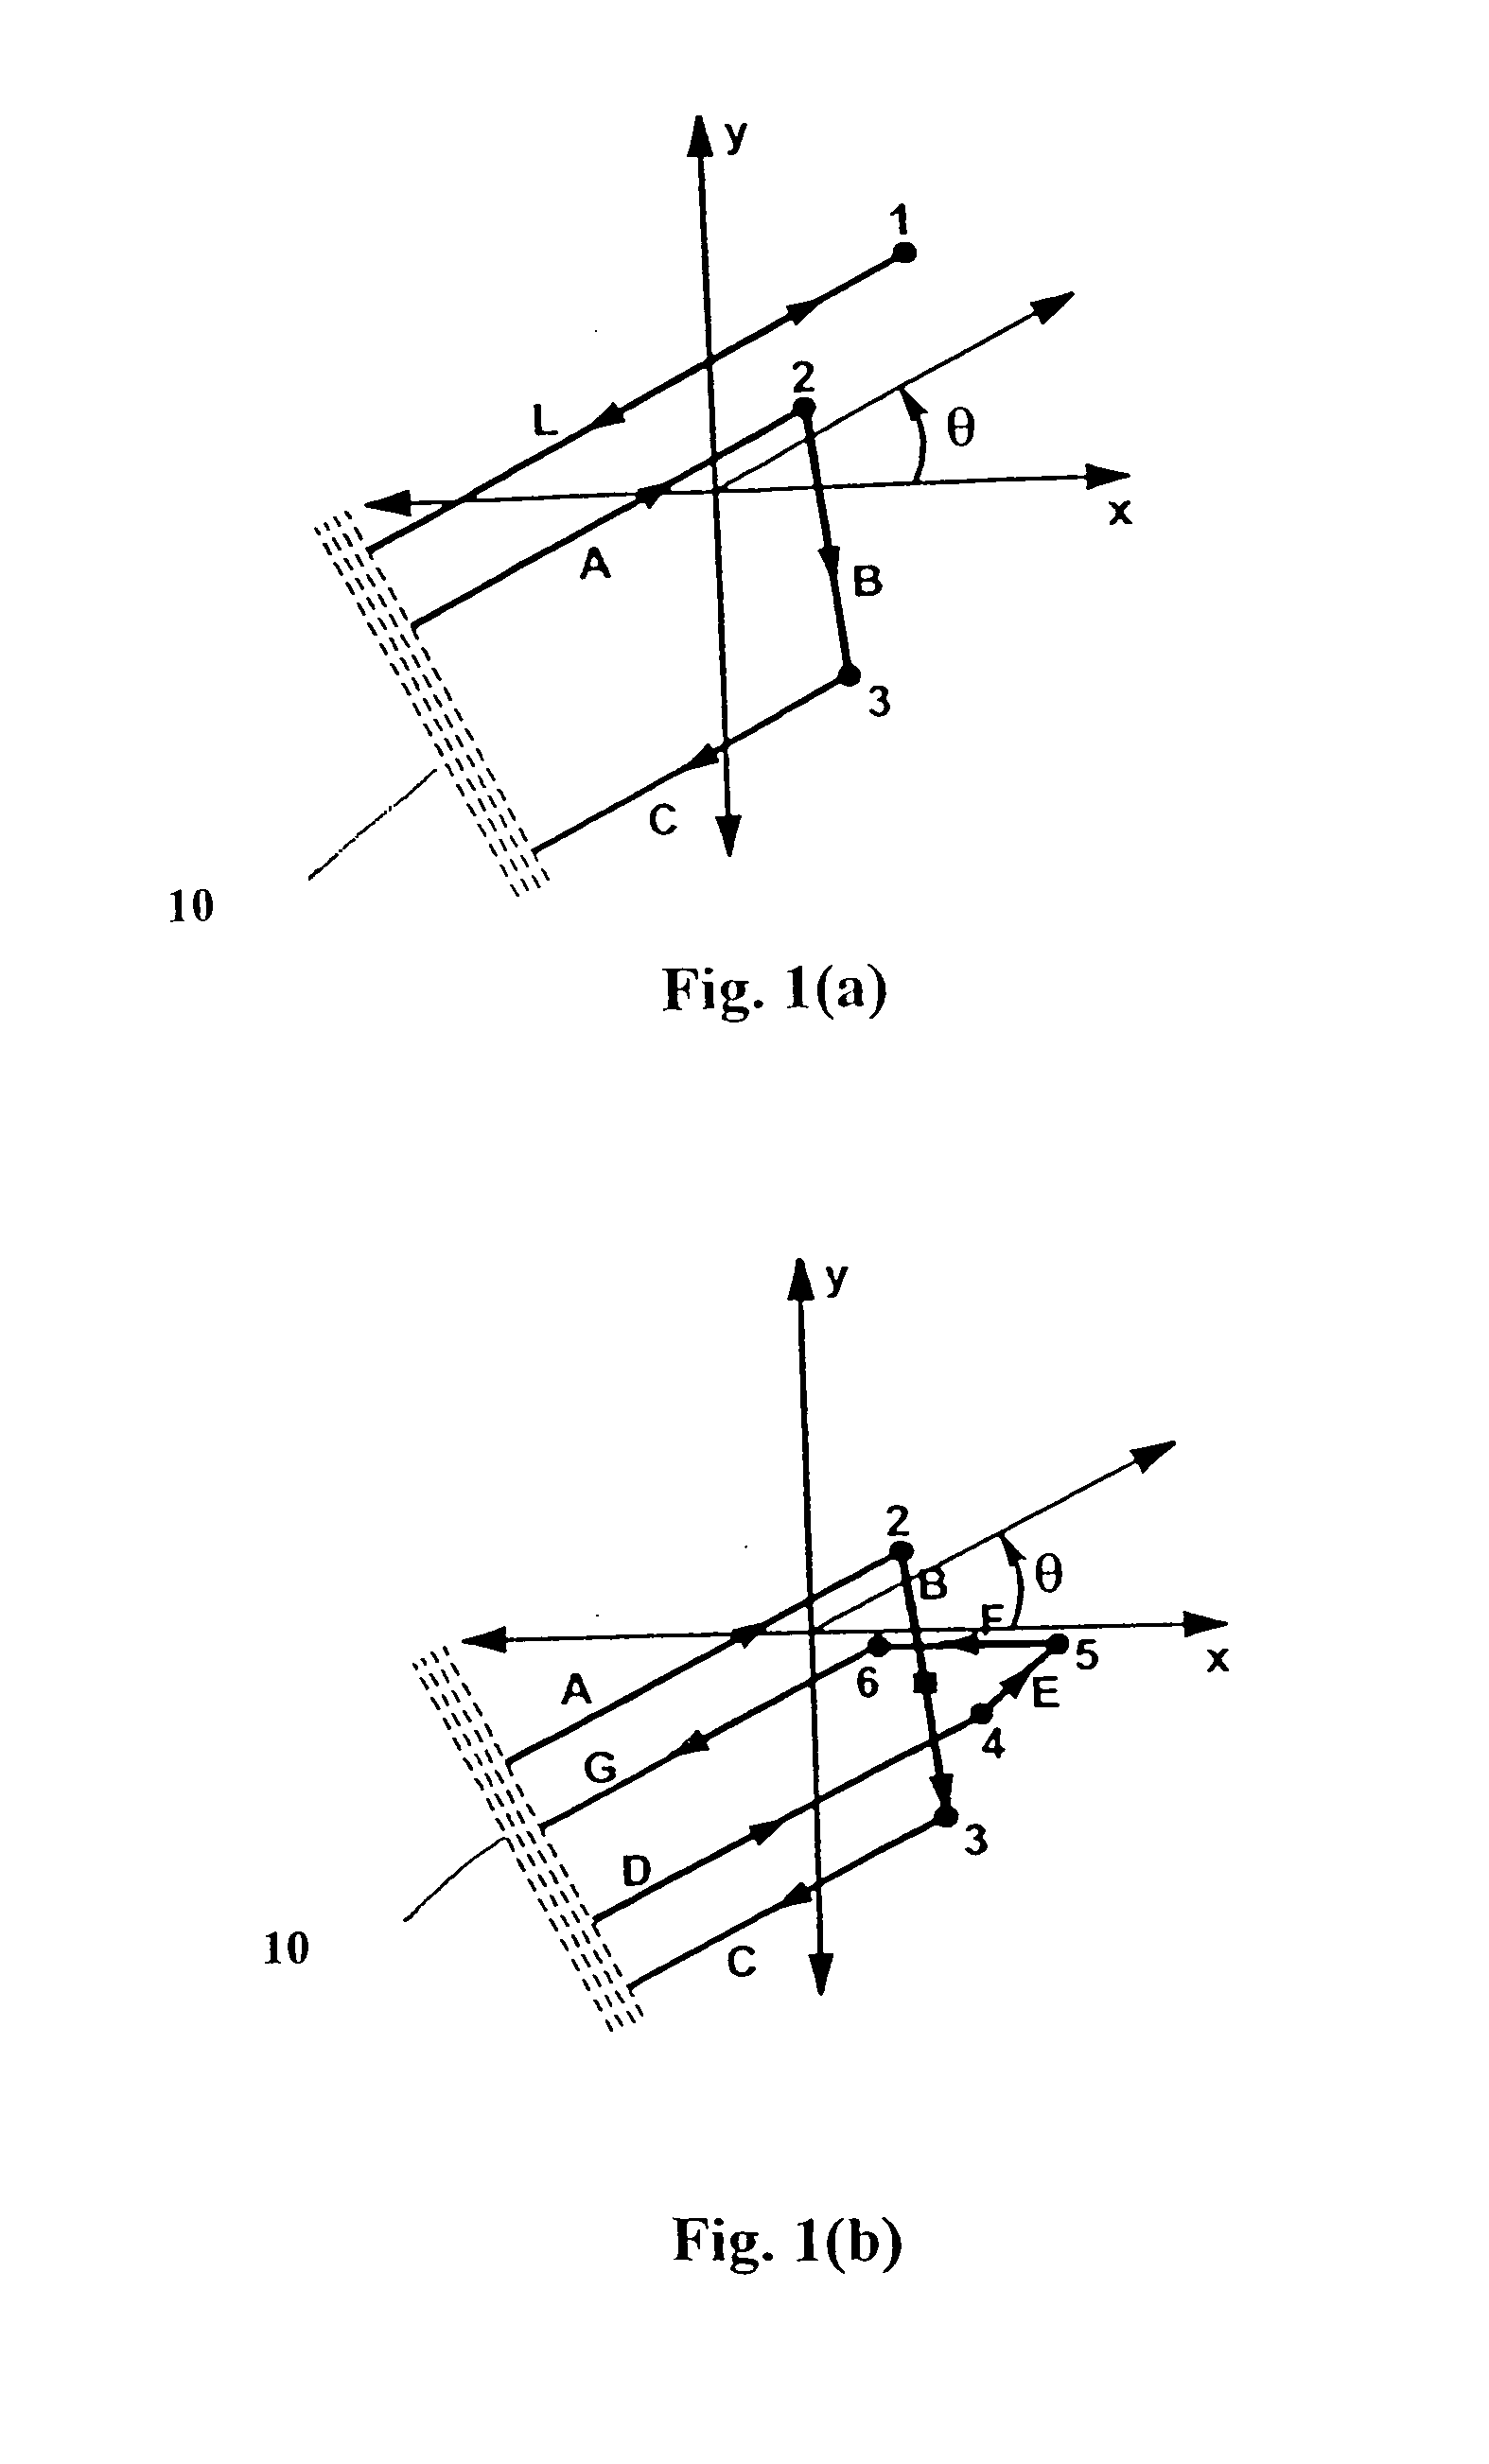 Method for developing and using an image reconstruction algorithm for multipath scattering